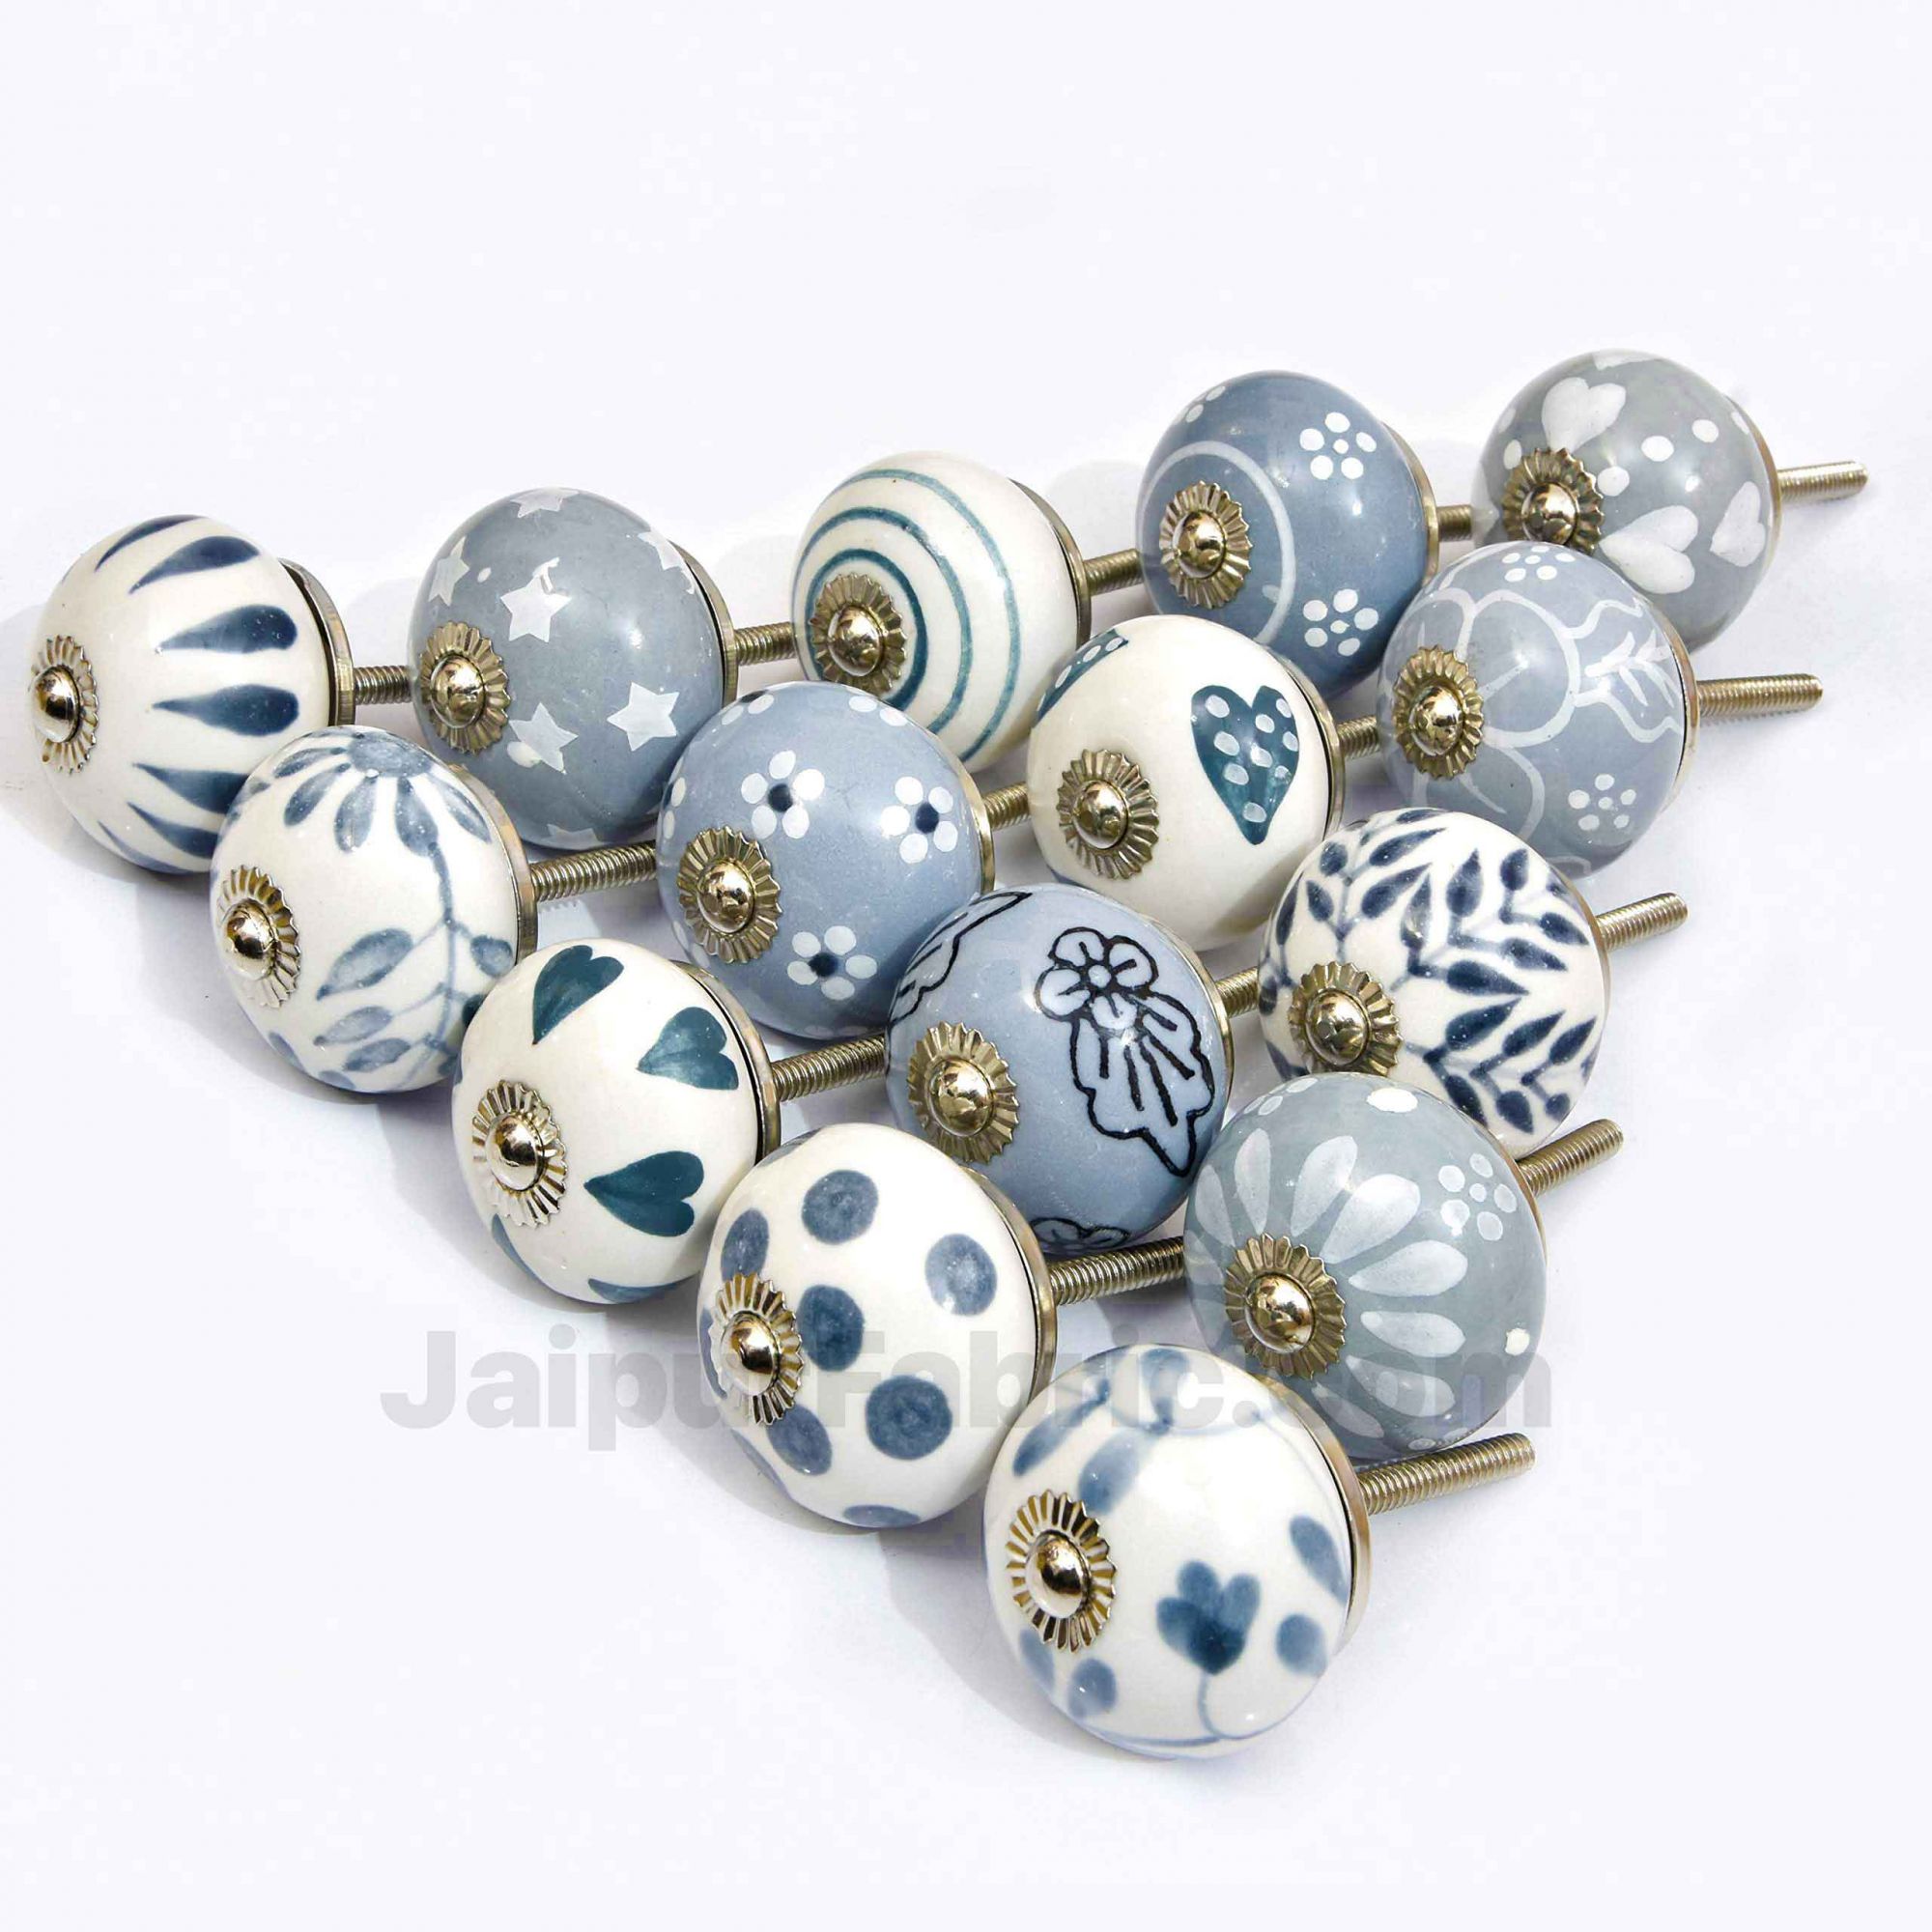 English Ceramic Knob Set of 15 Pcs Fabricated Knobs for Doors and Cabinets with Brass Blue Pottery